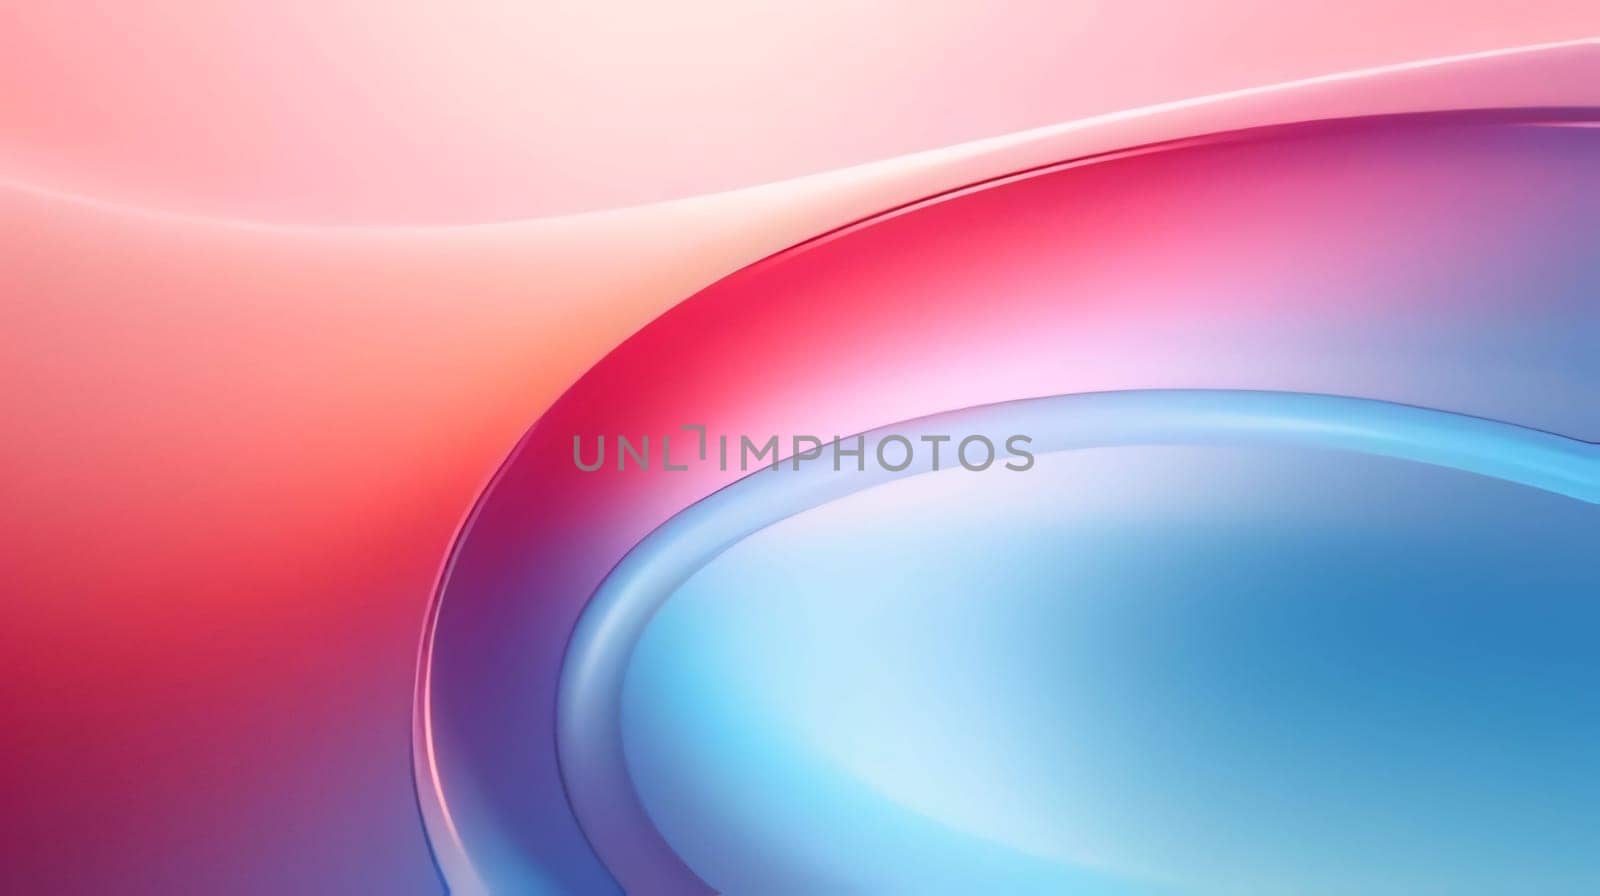 abstract background with smooth lines in pink and blue colors, computer generated images by ThemesS